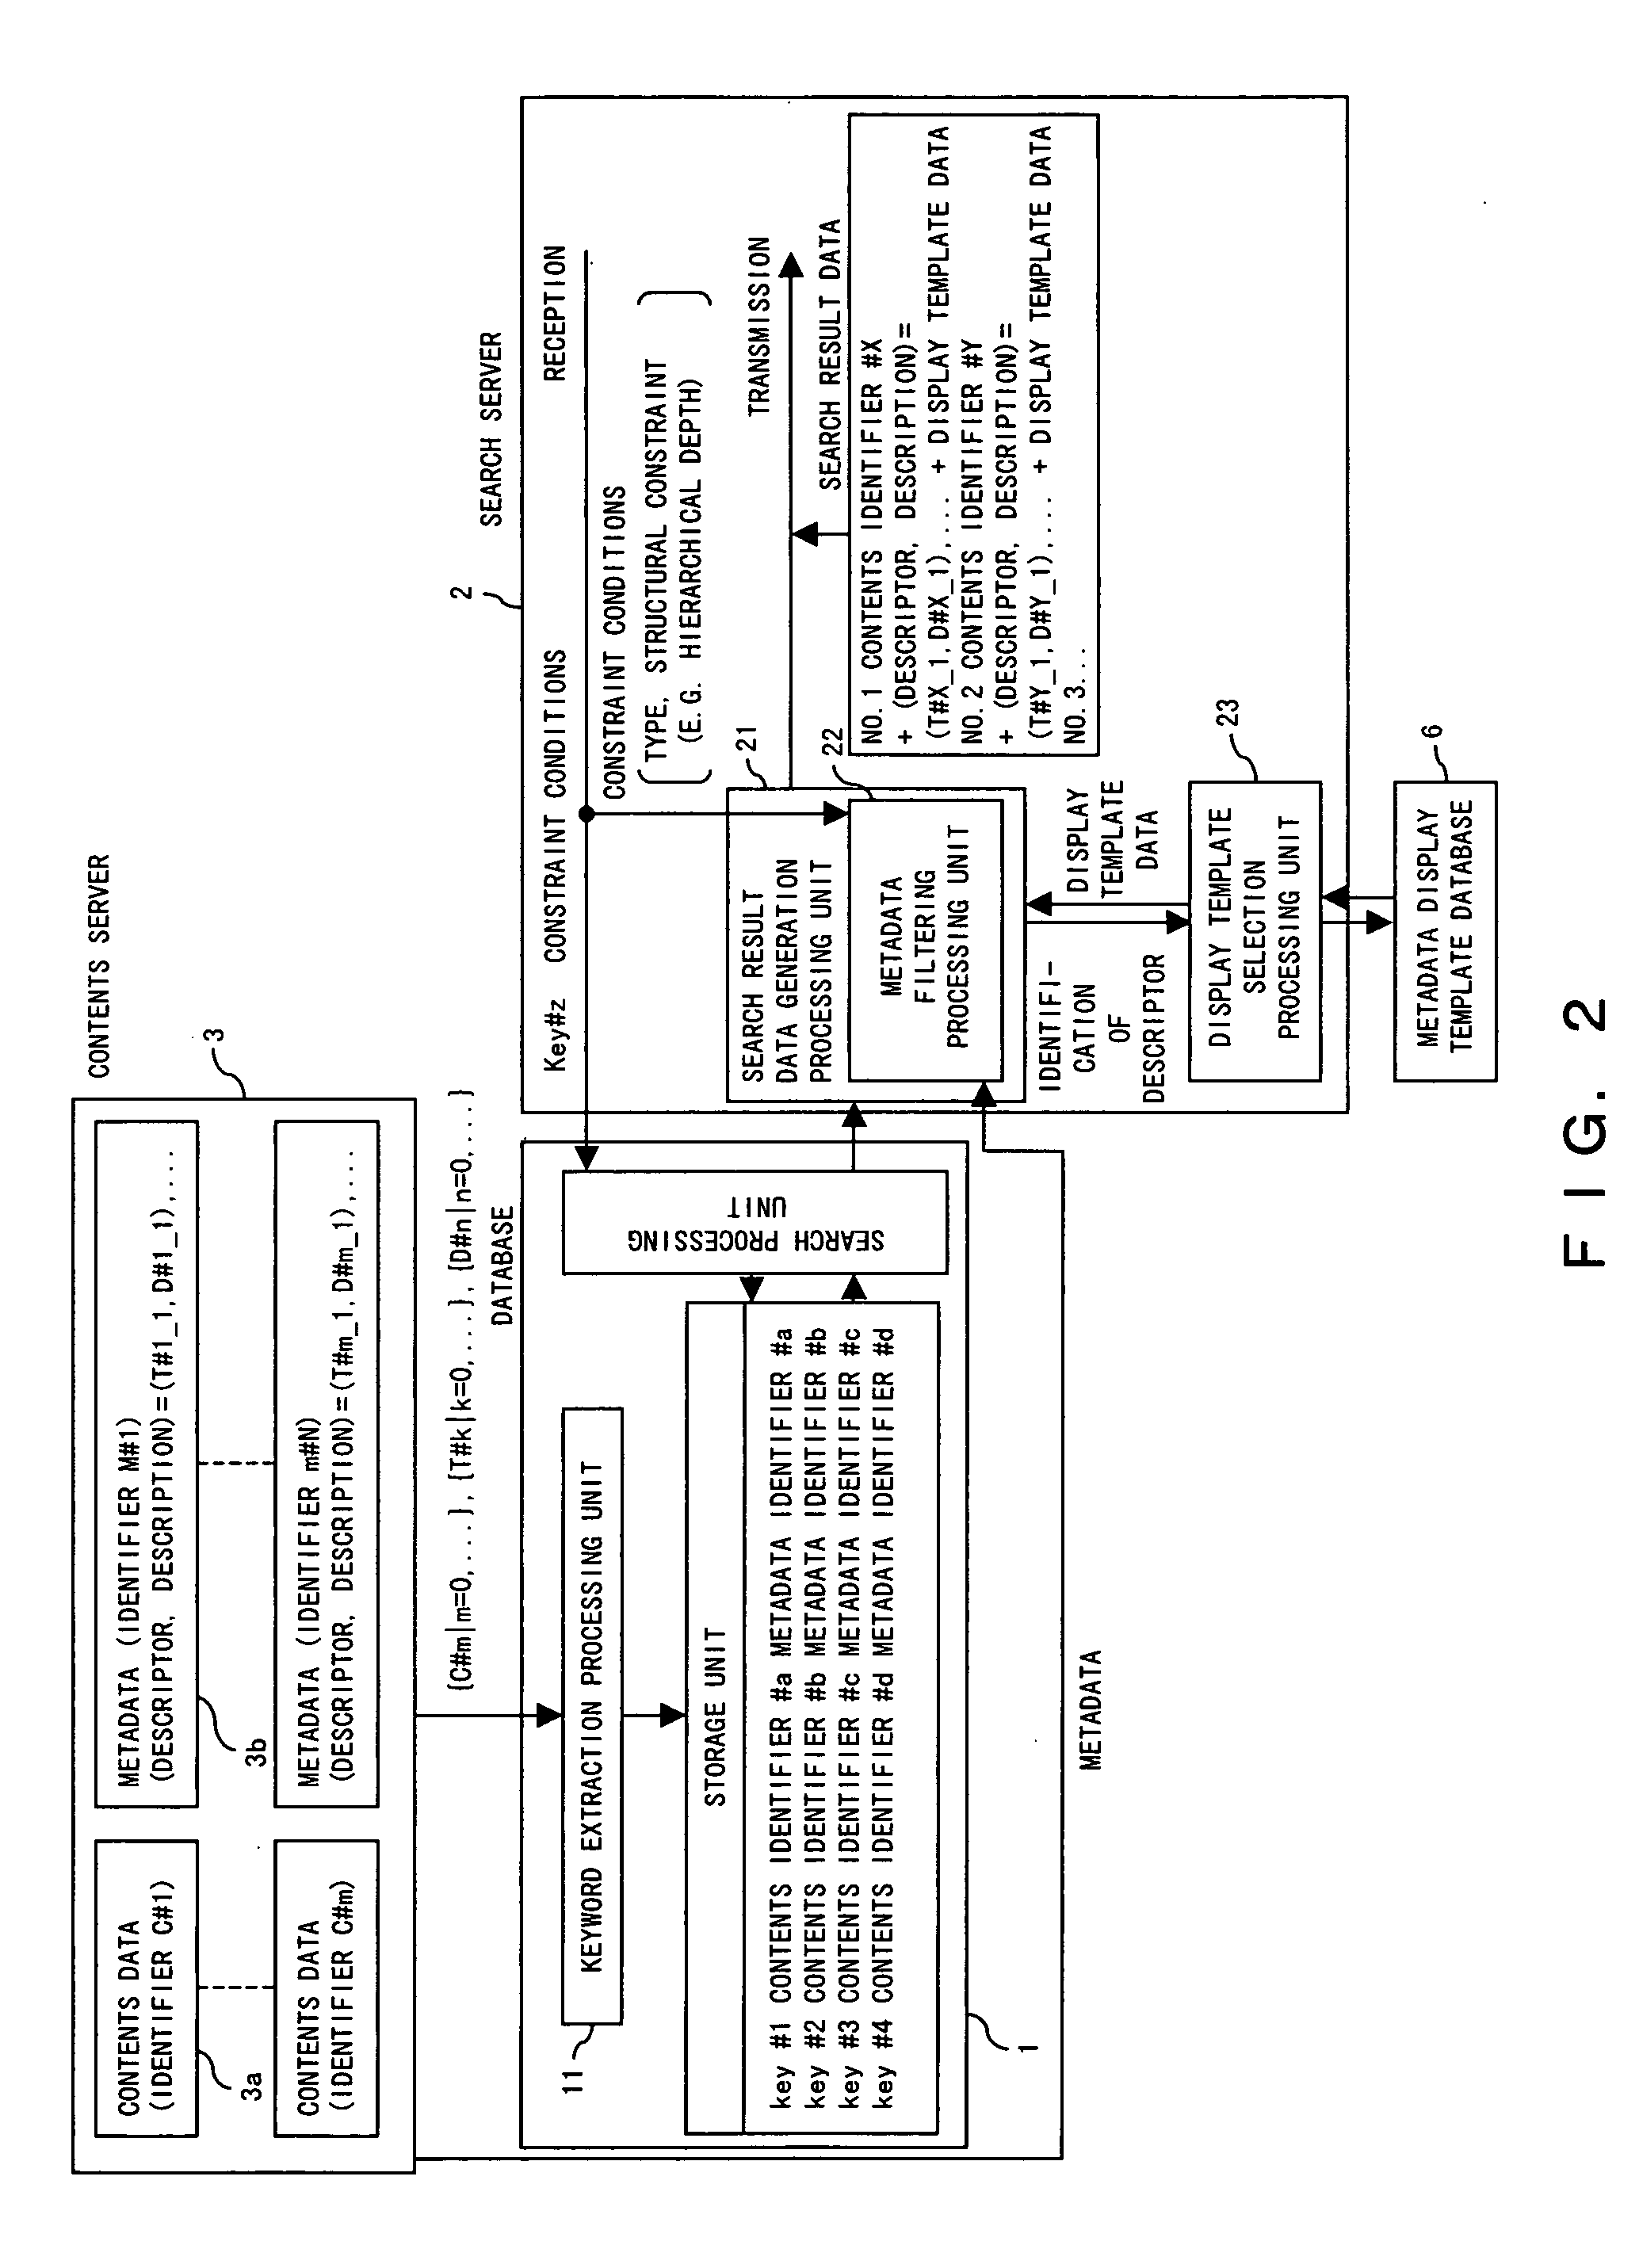 Search processing system, its search server, client, search processing method, program, and recording medium